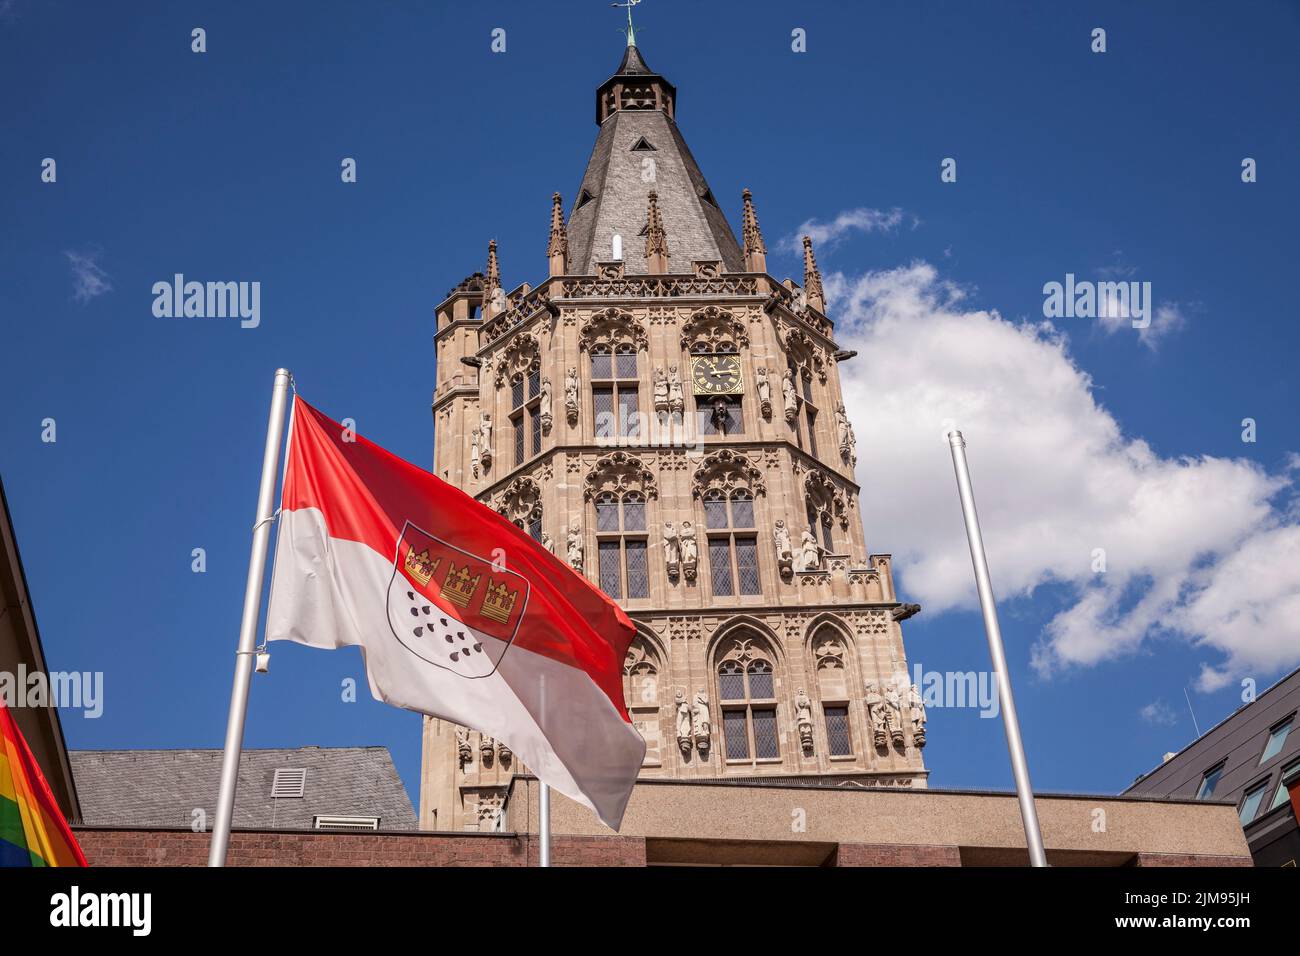 the flag of Cologne in front of the tower of the historical town hall in the old part of the town, Cologne, Germany. die Koelner Flagge vor dem Turm d Stock Photo